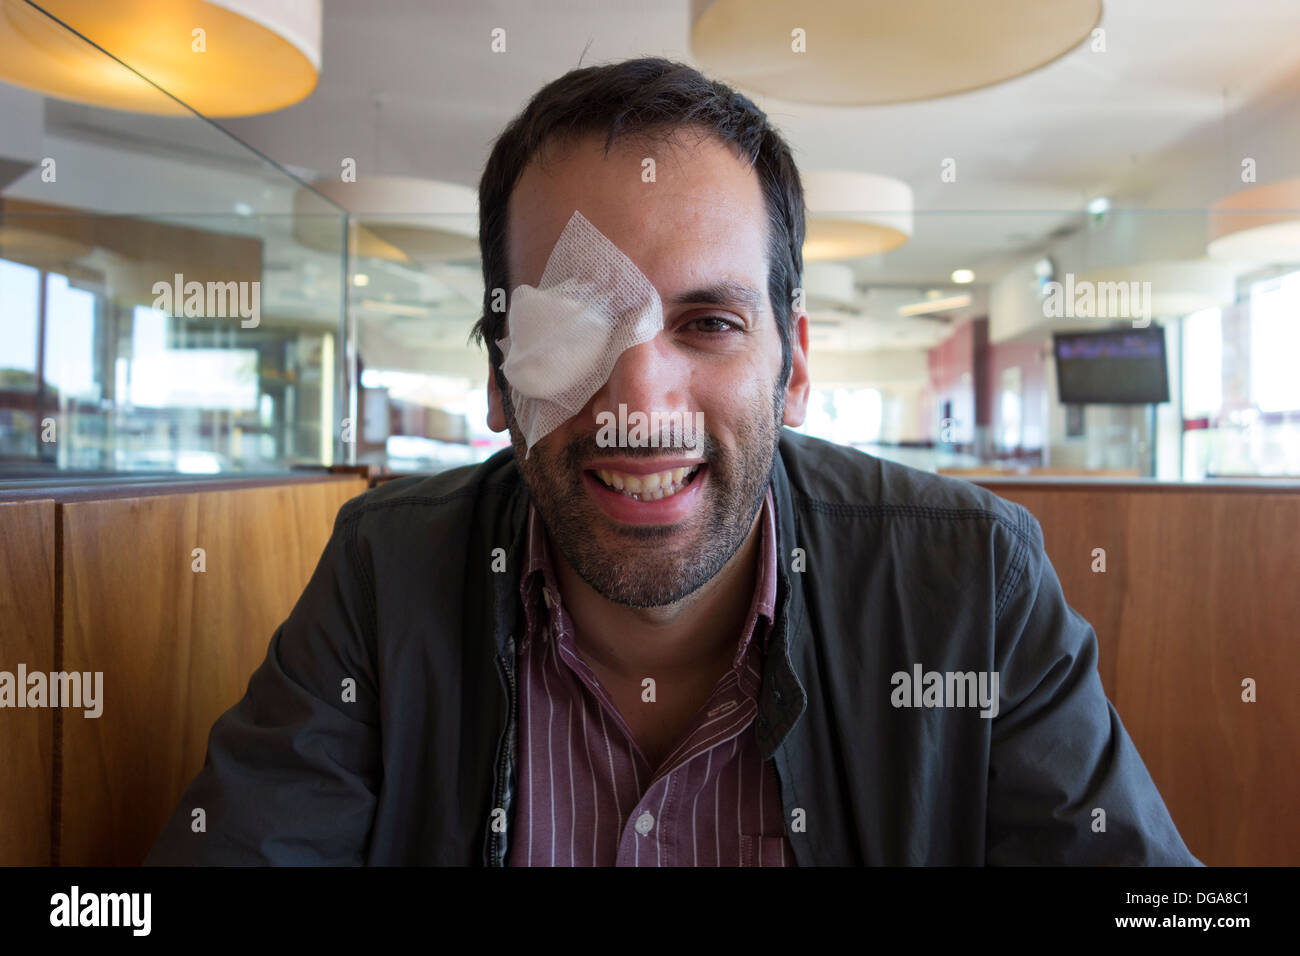 Man with eye patch over injured eye Stock Photo